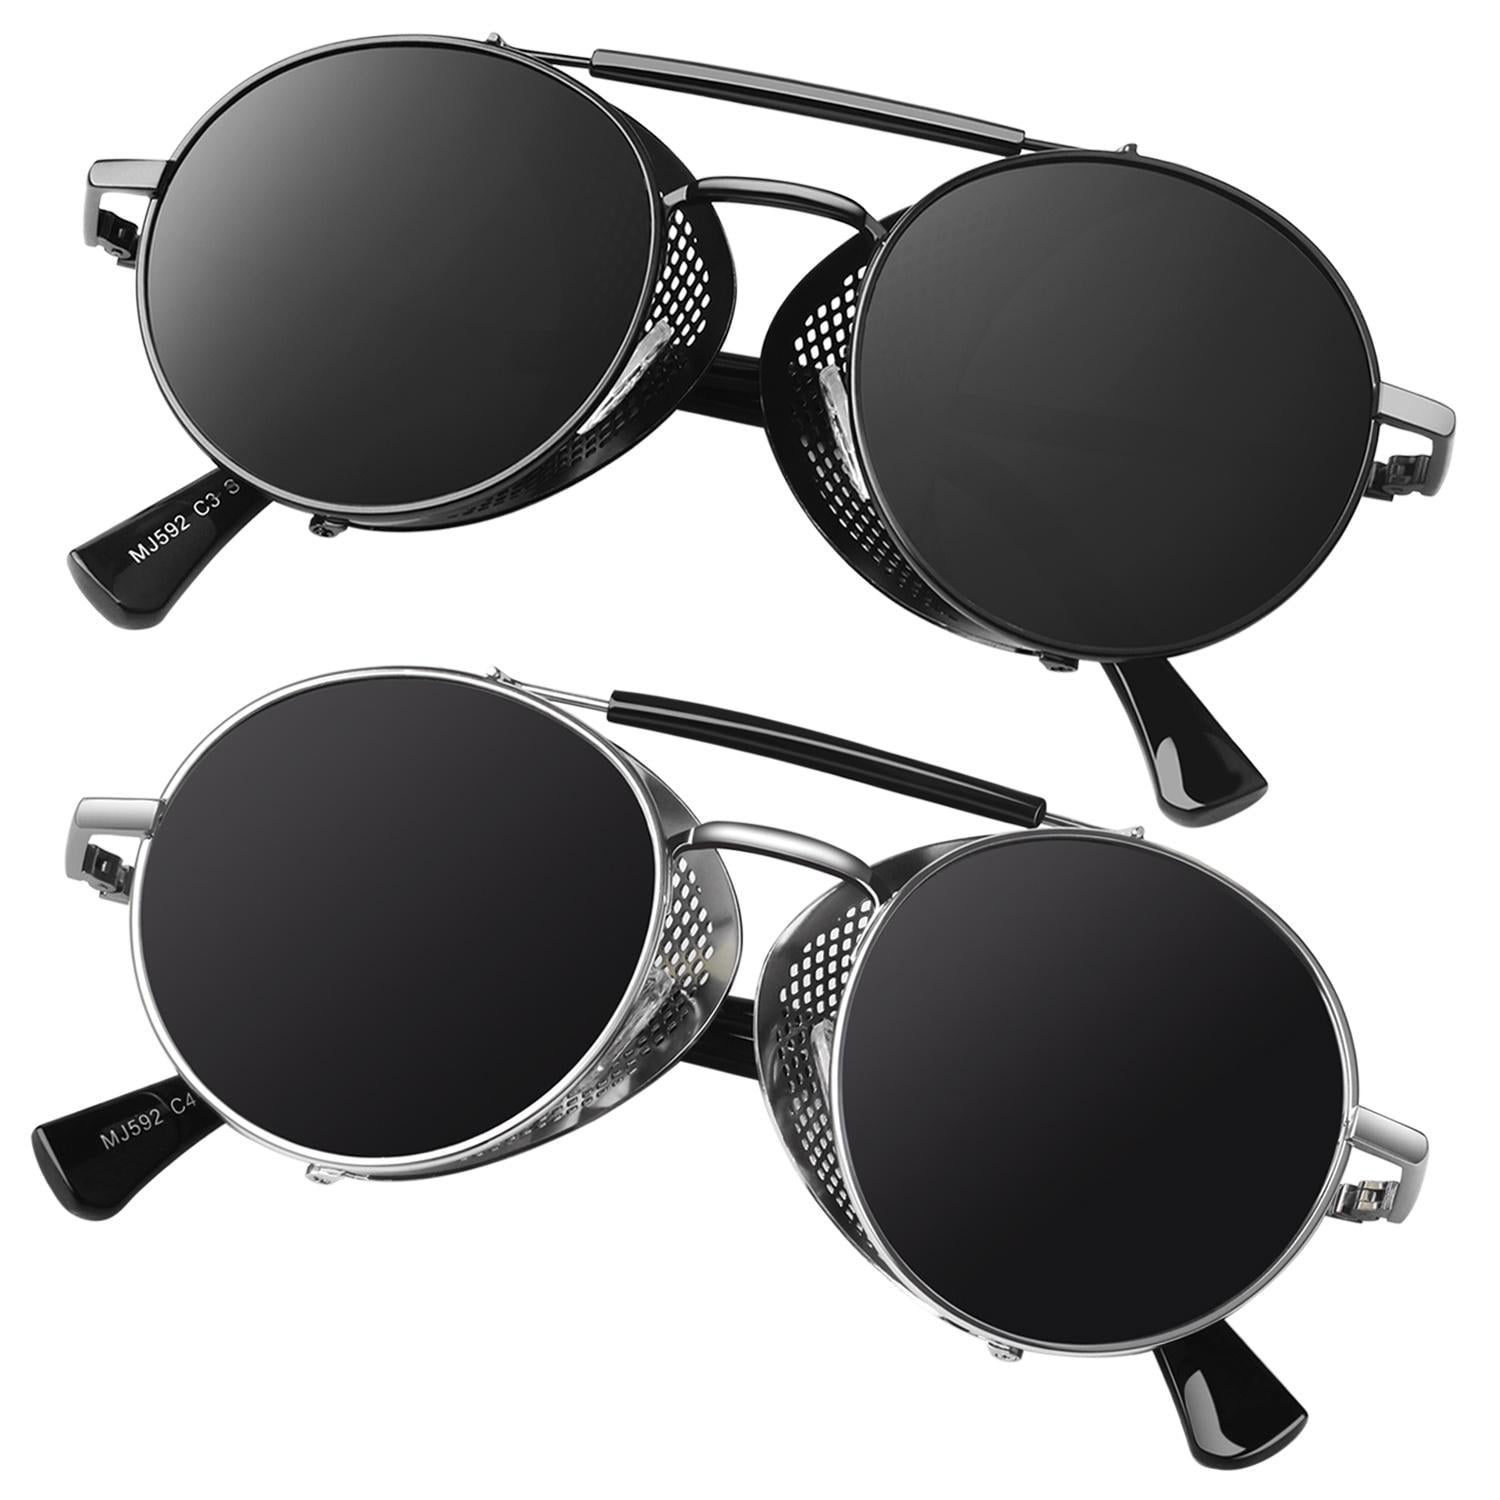 Battle Vision - Trooper Vision HD Polarized UV Sunglasses by Atomic Beam,  See 10x Clearer, Eliminating Glare & Enhancing Color Black Size: 2 Pairs  (Case Not Included): Buy Online at Best Price